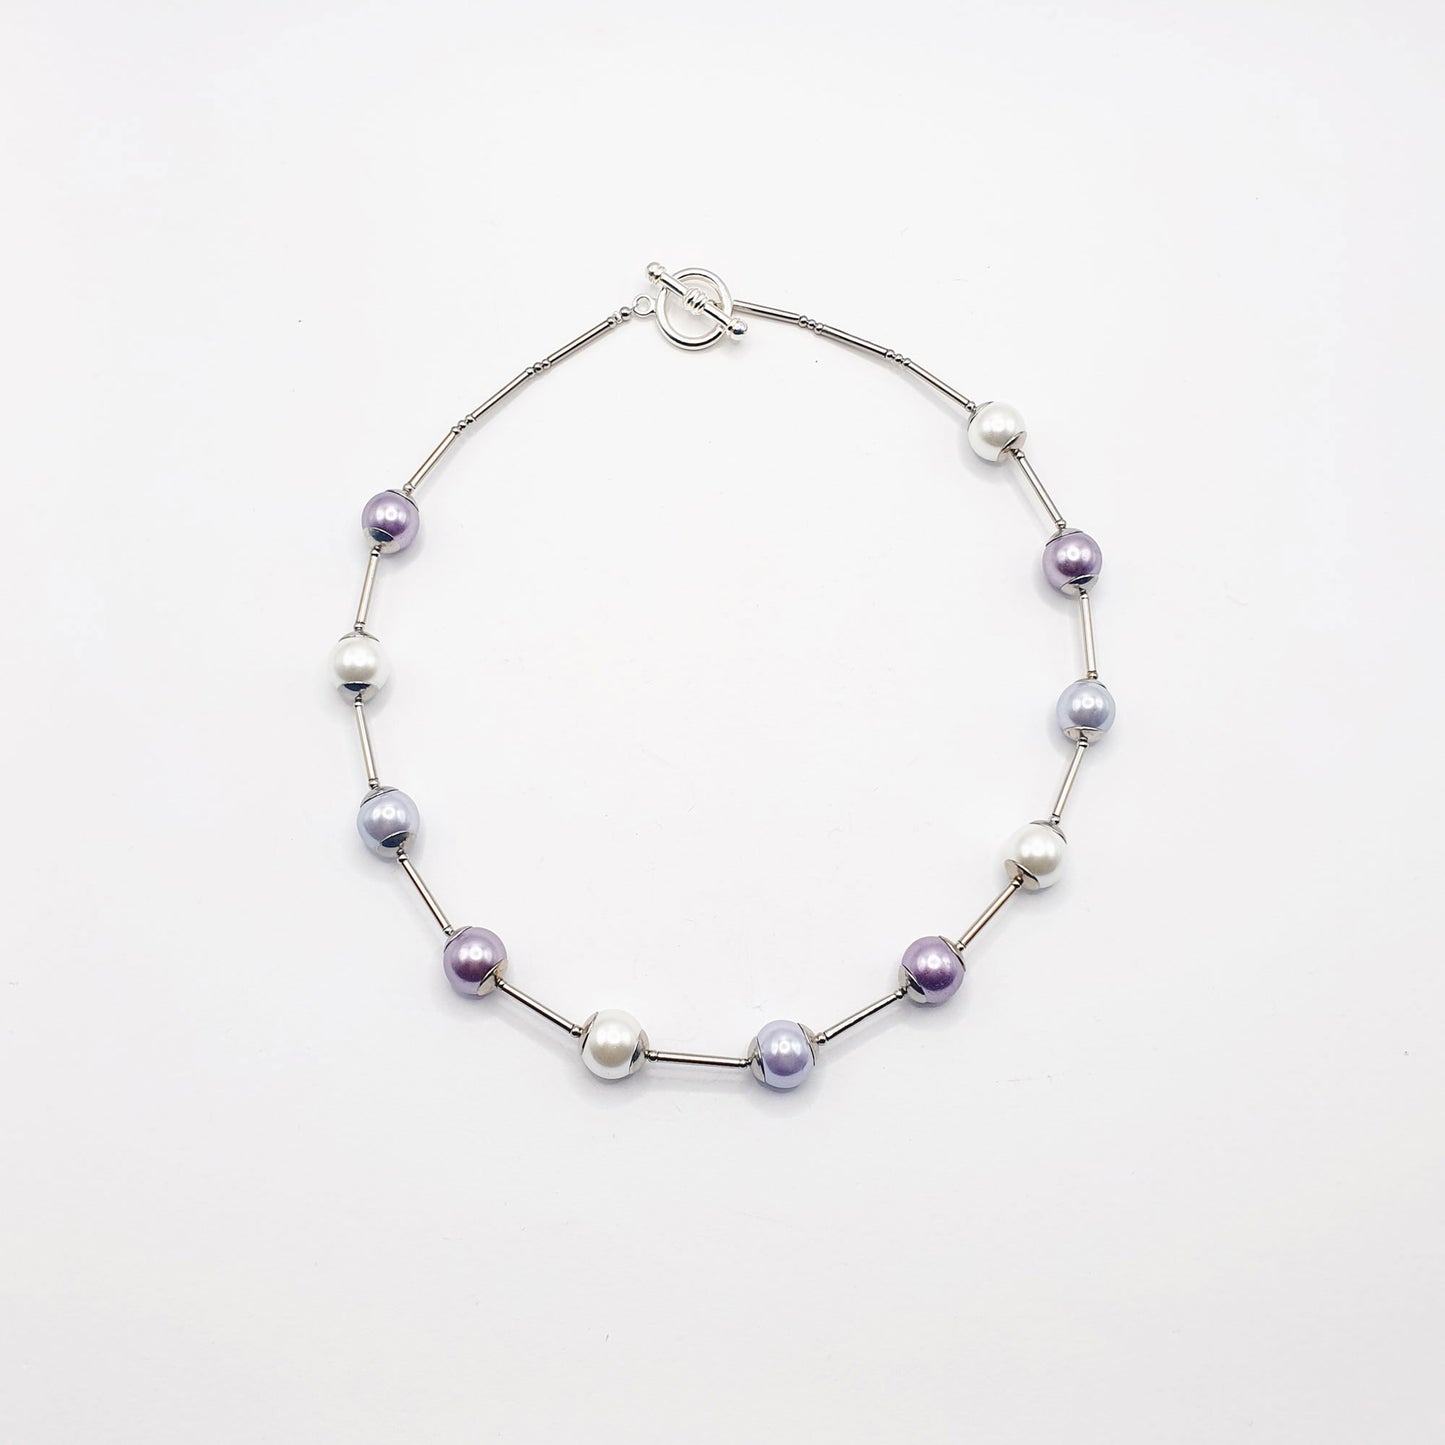 Glass pearl orb-style necklace in lavender pastels